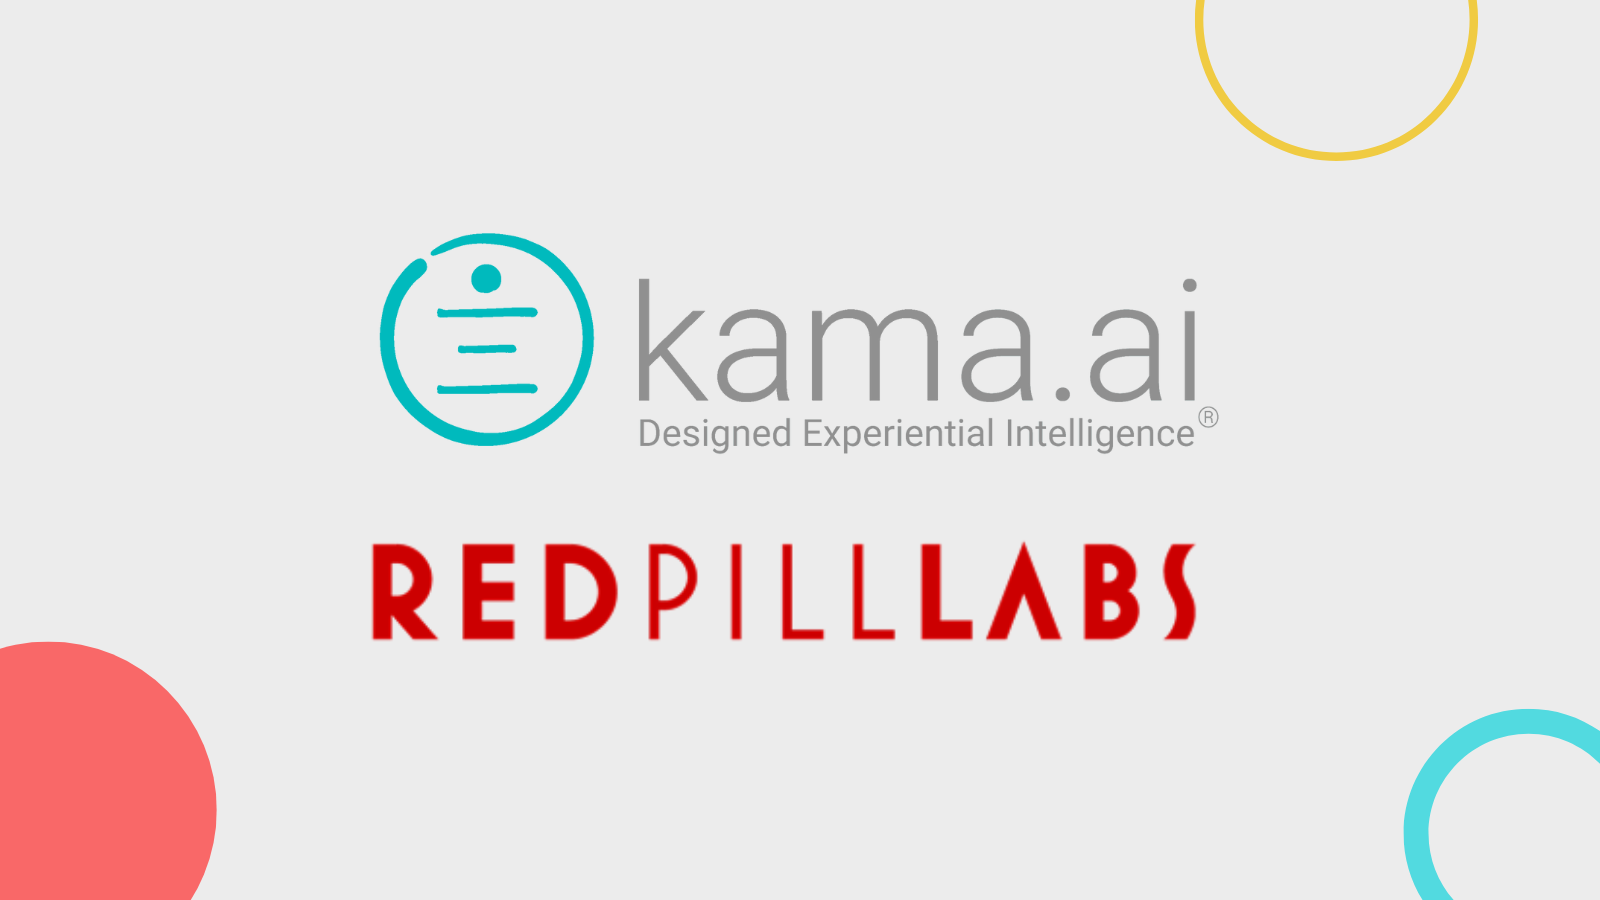 kama.ai and Red Pill Labs announce a new partnership.